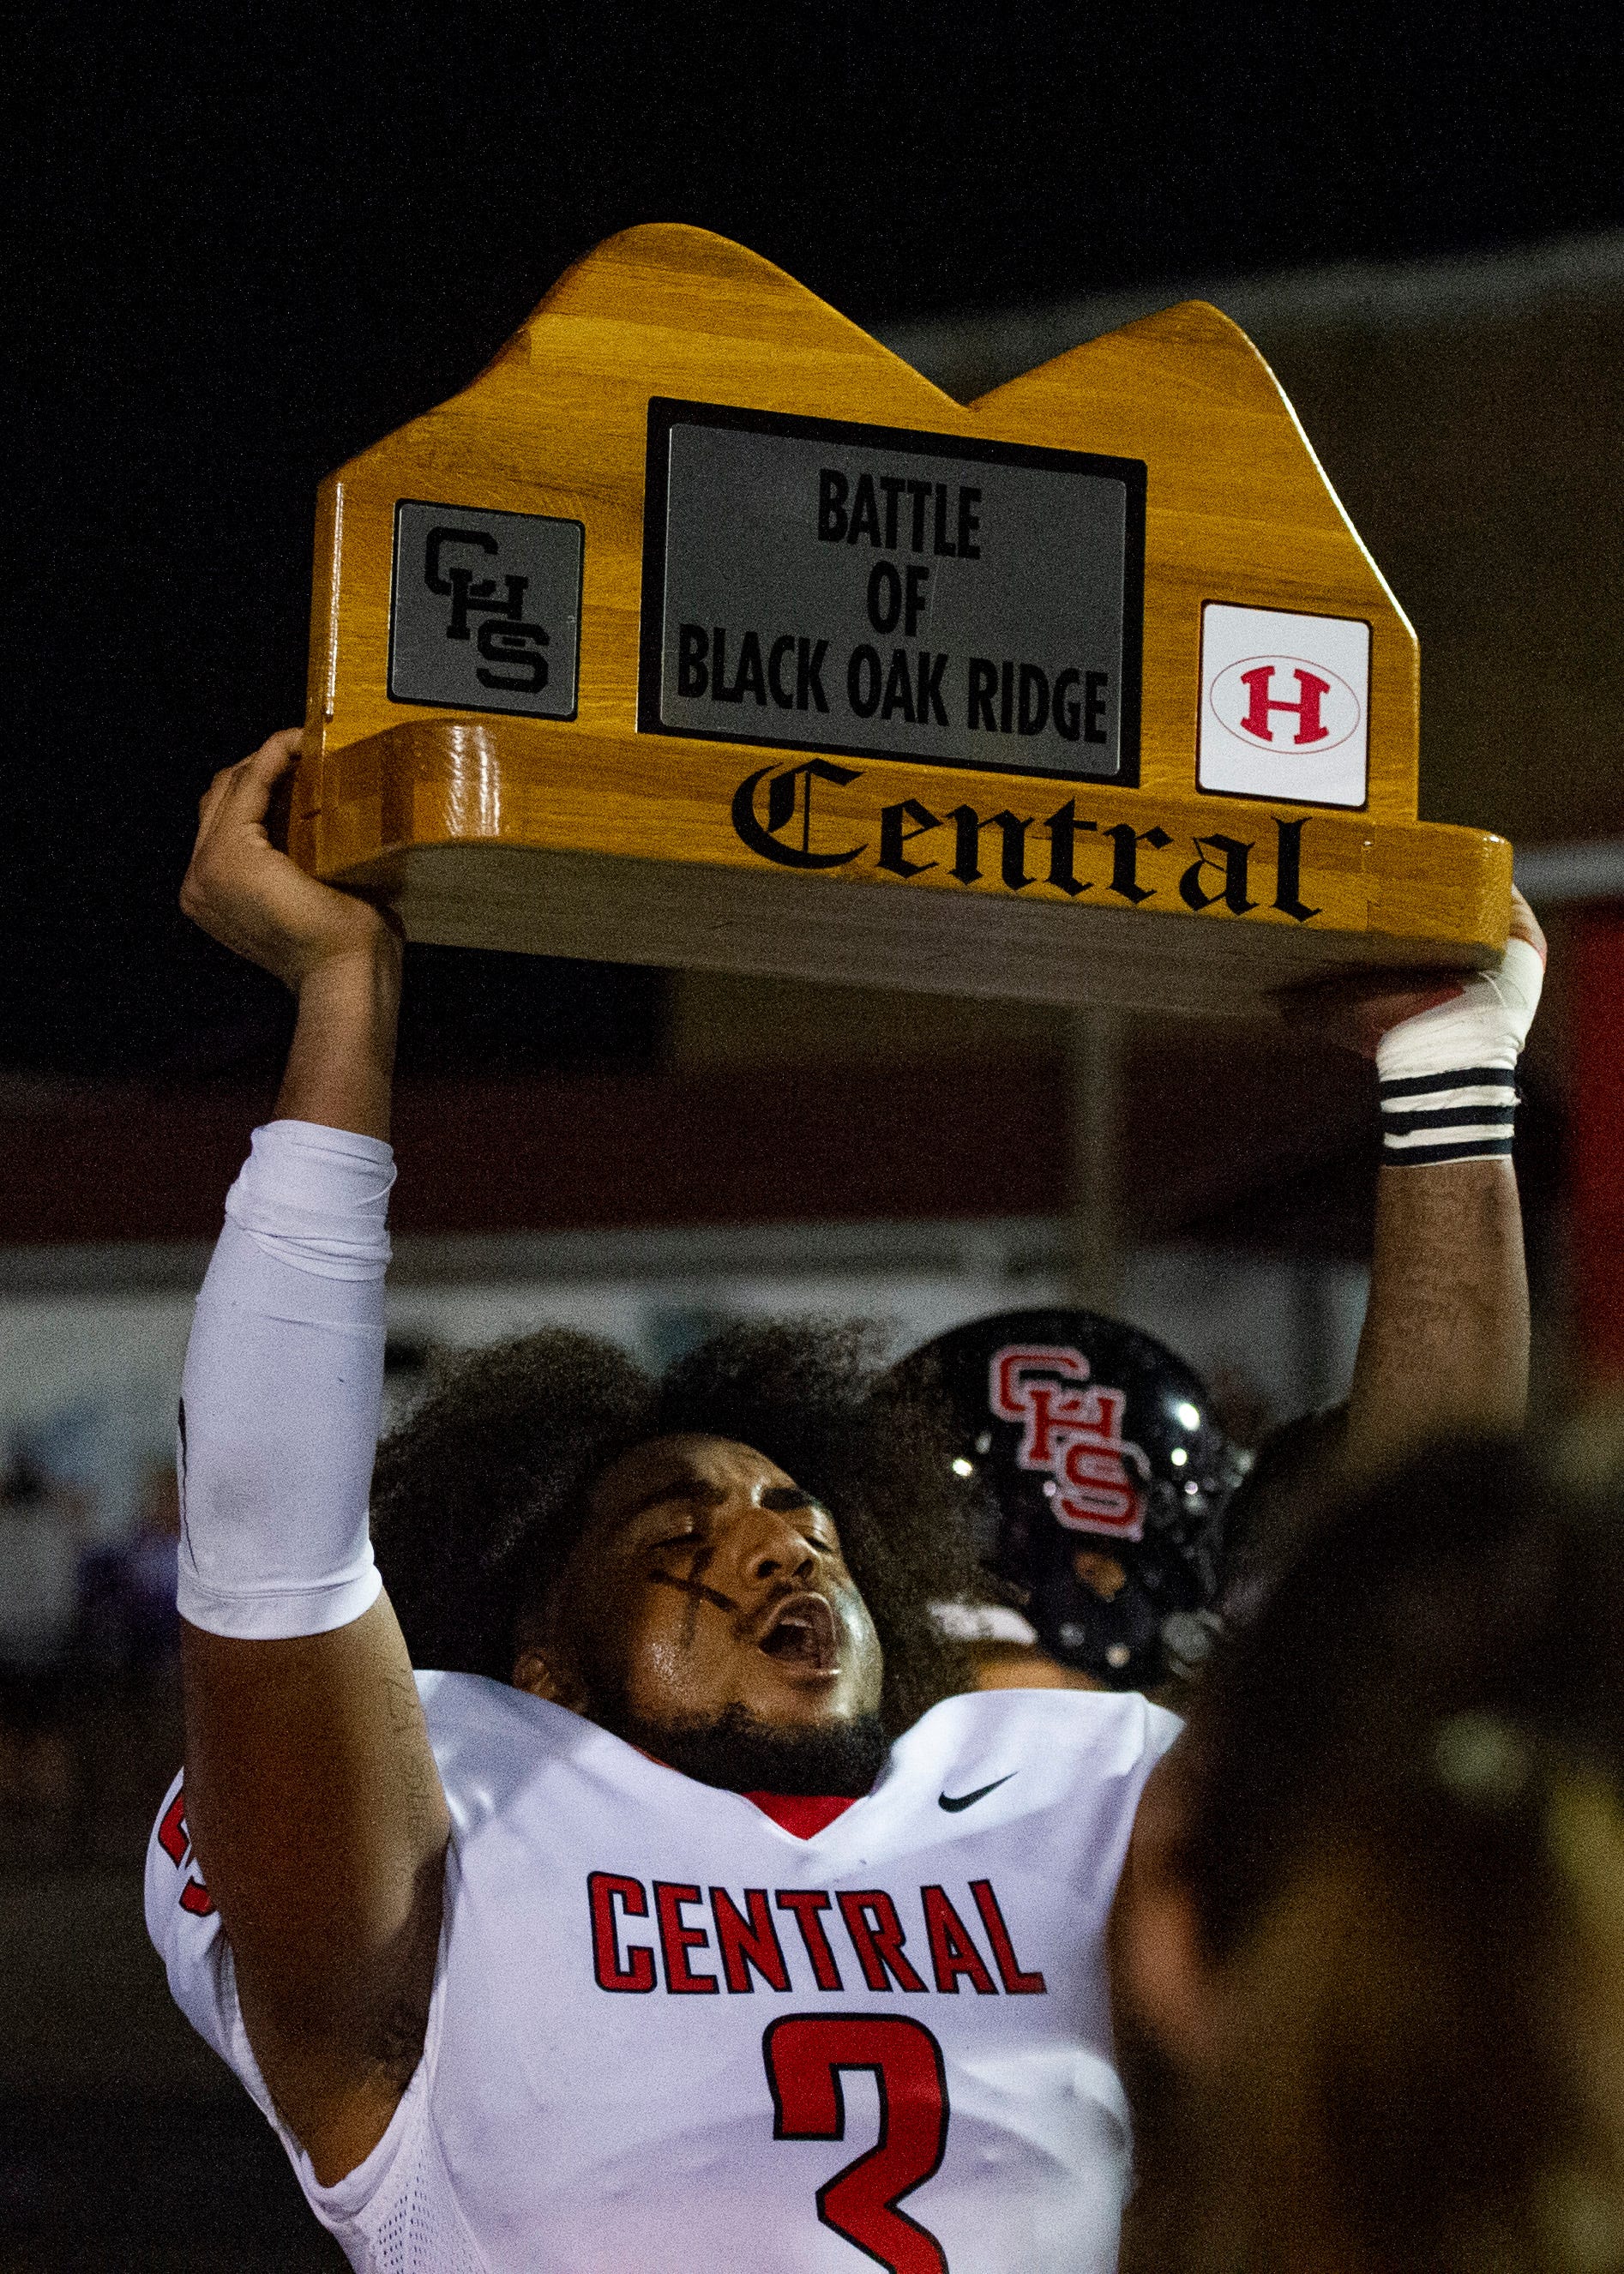 Central's Eunique Valentine (3) holds up the "Battle of Black Oak Ridge" rivalry trophy after the Halls and Central high school football game on Friday, October 4, 2019 at Halls High School.